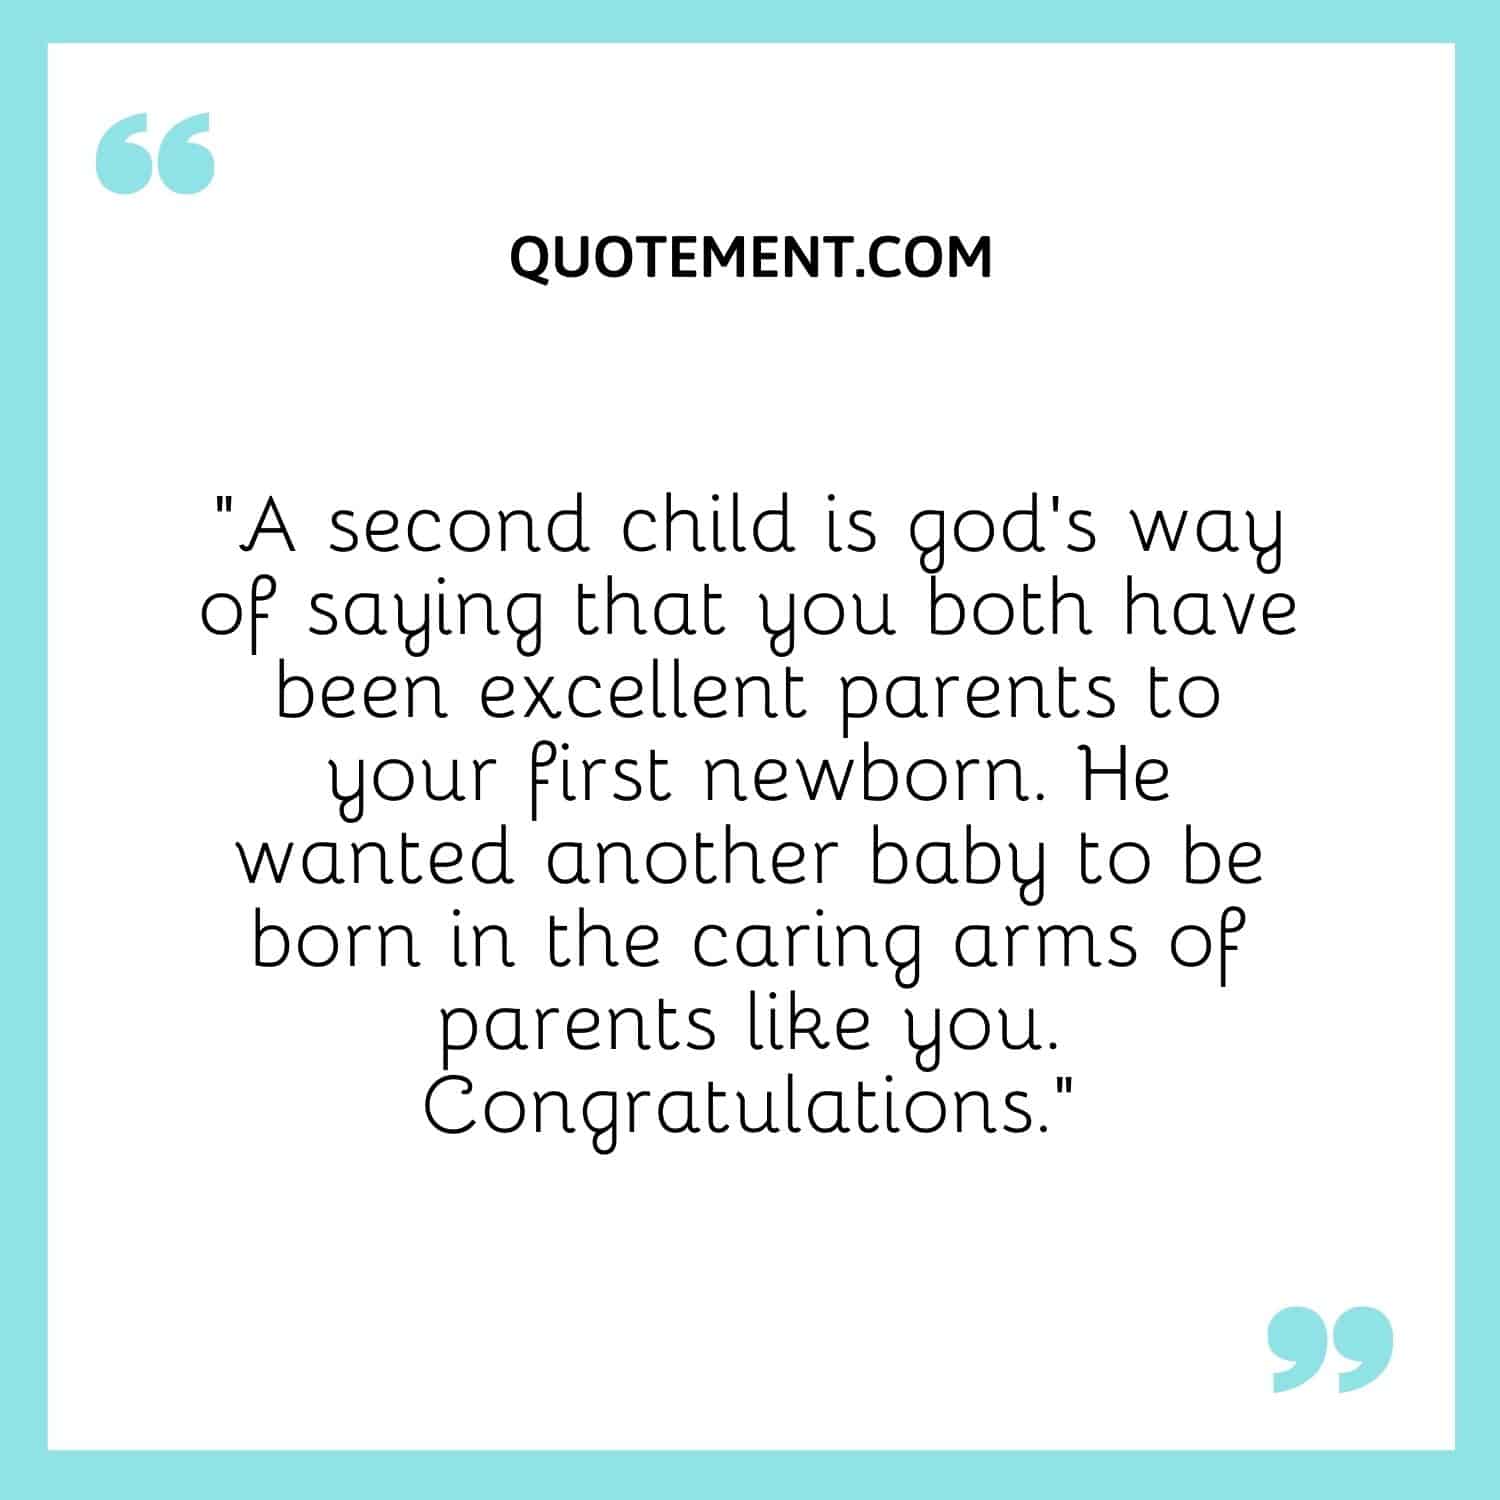 A second child is god’s way of saying that you both have been excellent parents to your first newborn.